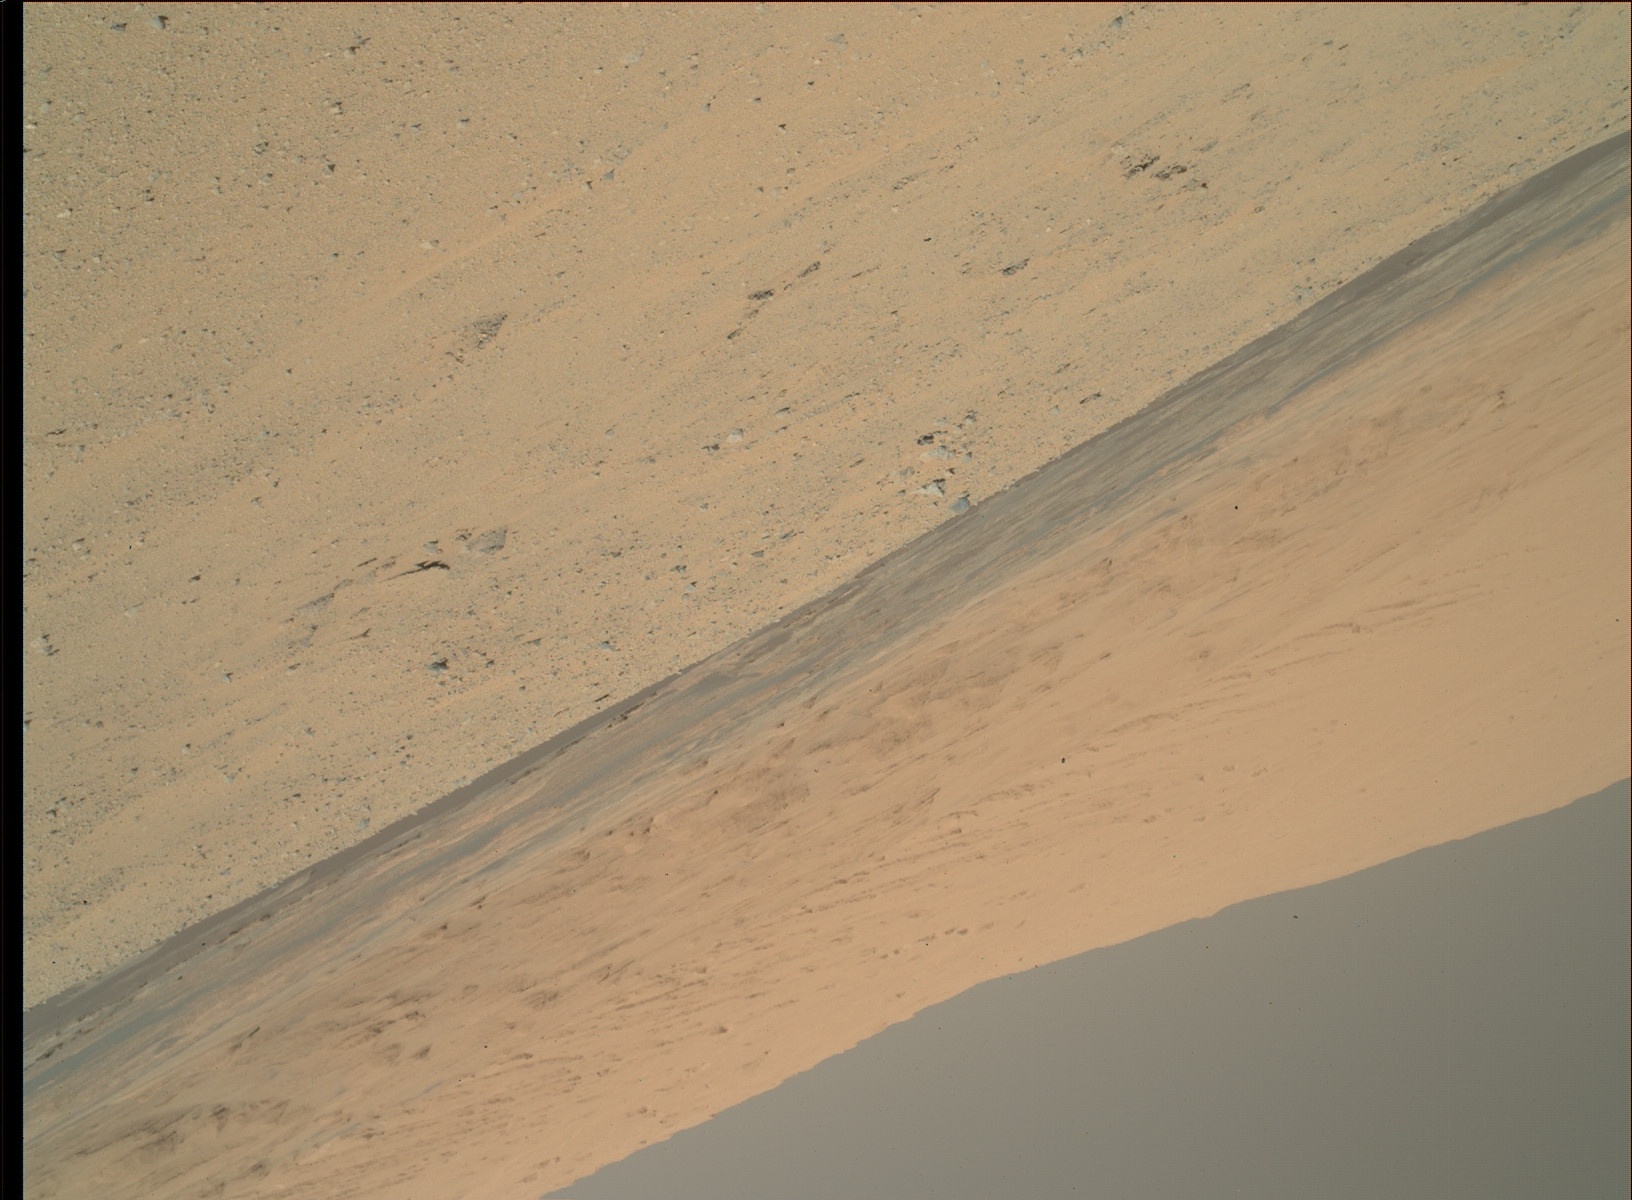 Nasa's Mars rover Curiosity acquired this image using its Mars Hand Lens Imager (MAHLI) on Sol 643